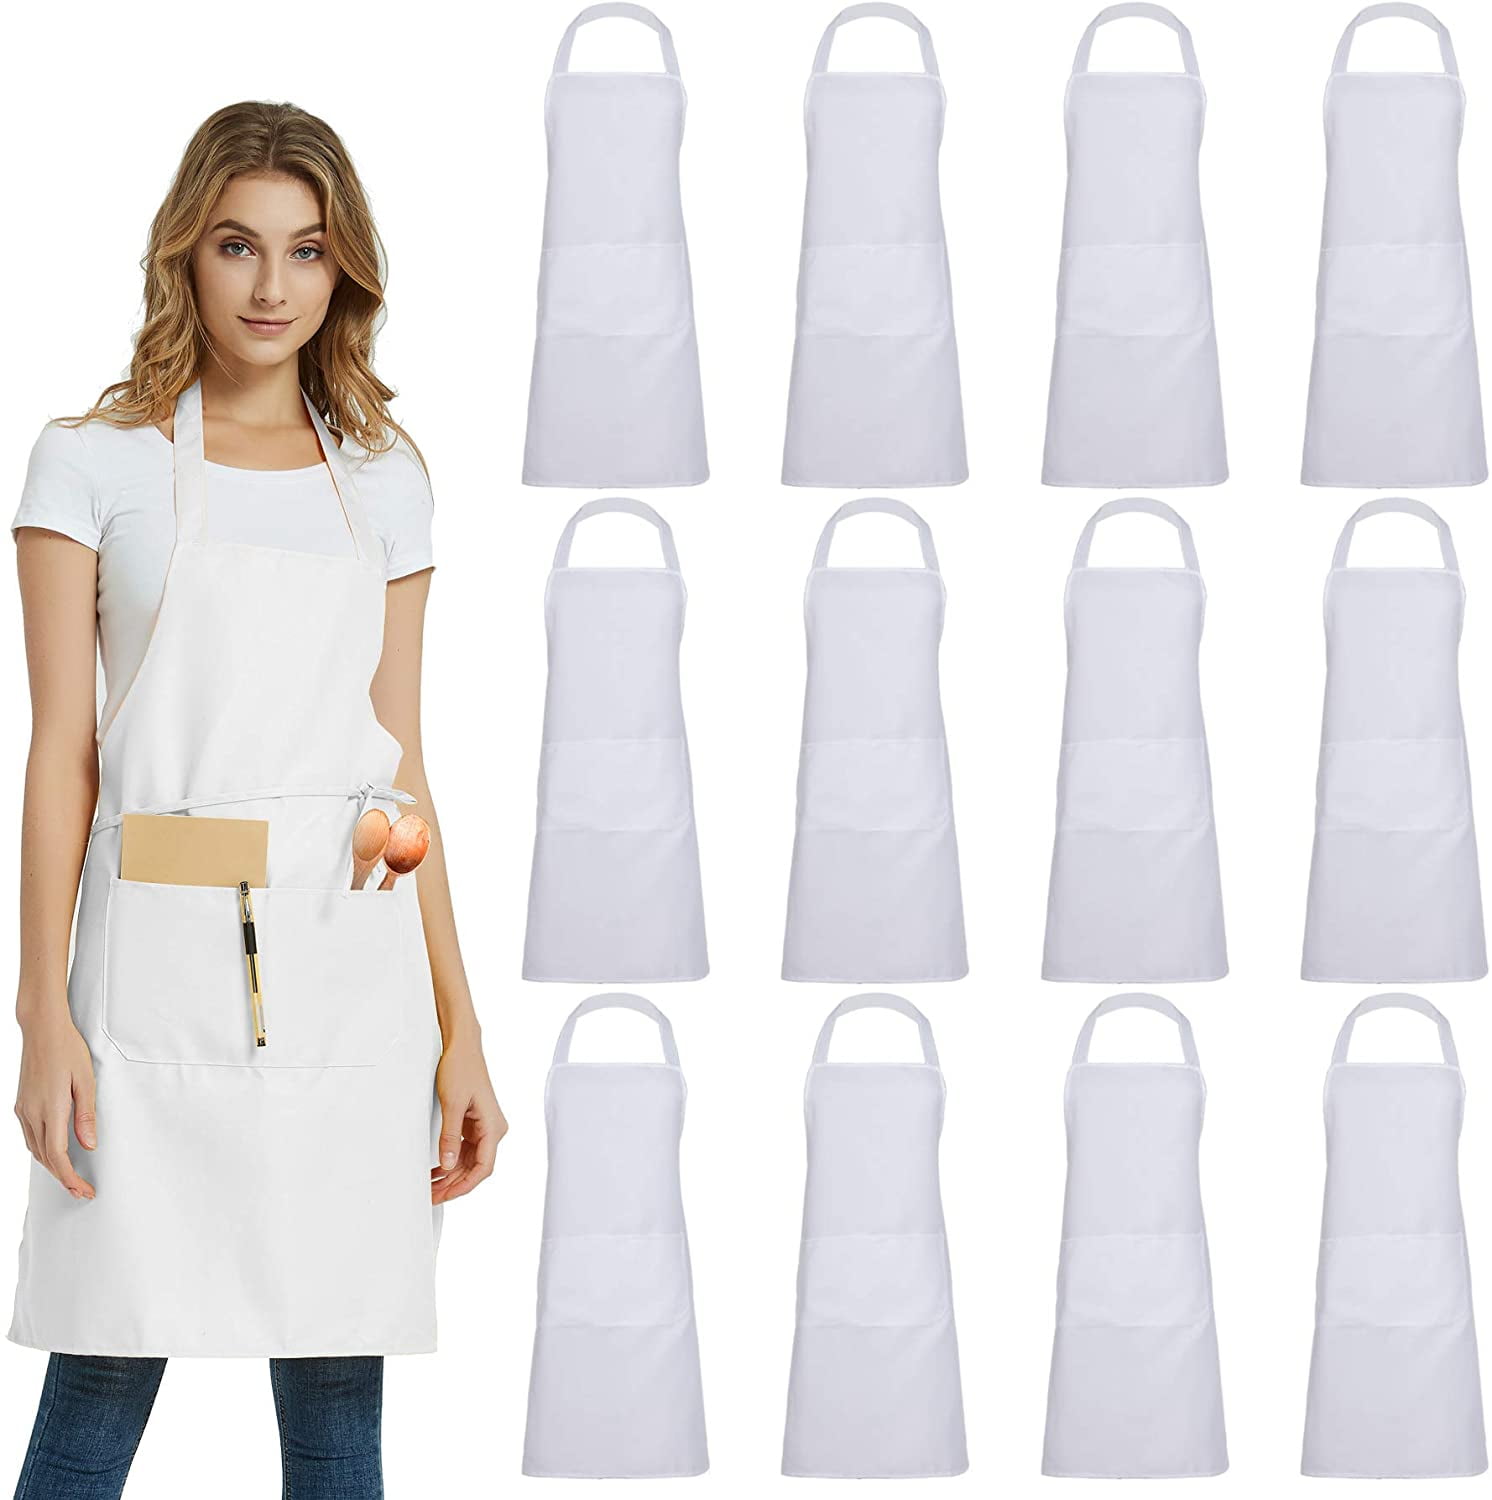 12 new silver commercial grade kitchen bib aprons made in the usa with fast ship 